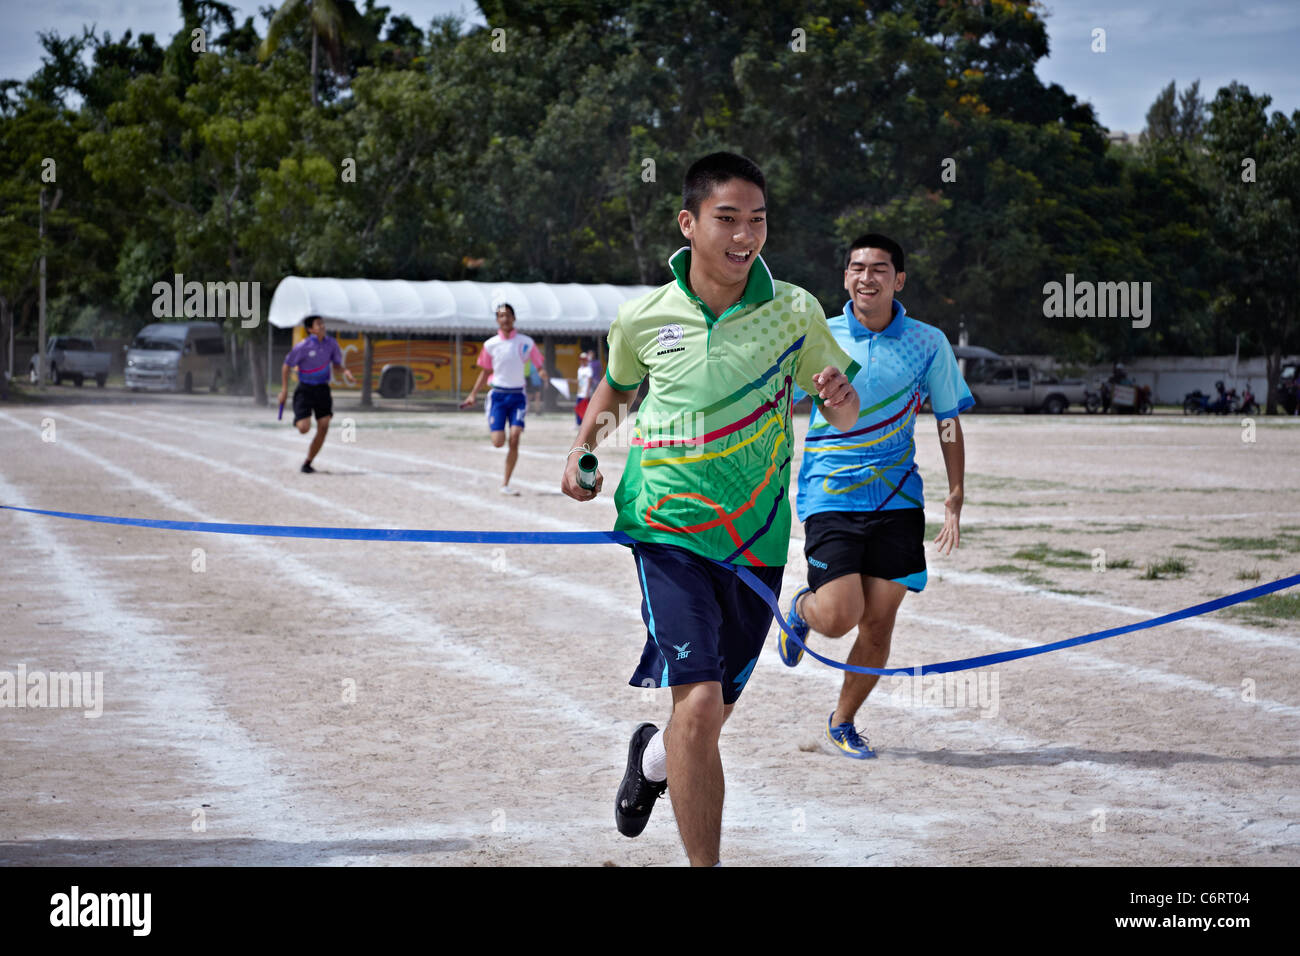 Winner crossing the finishing line at an Asian school sports day event. Thailand S. E. Asia Stock Photo